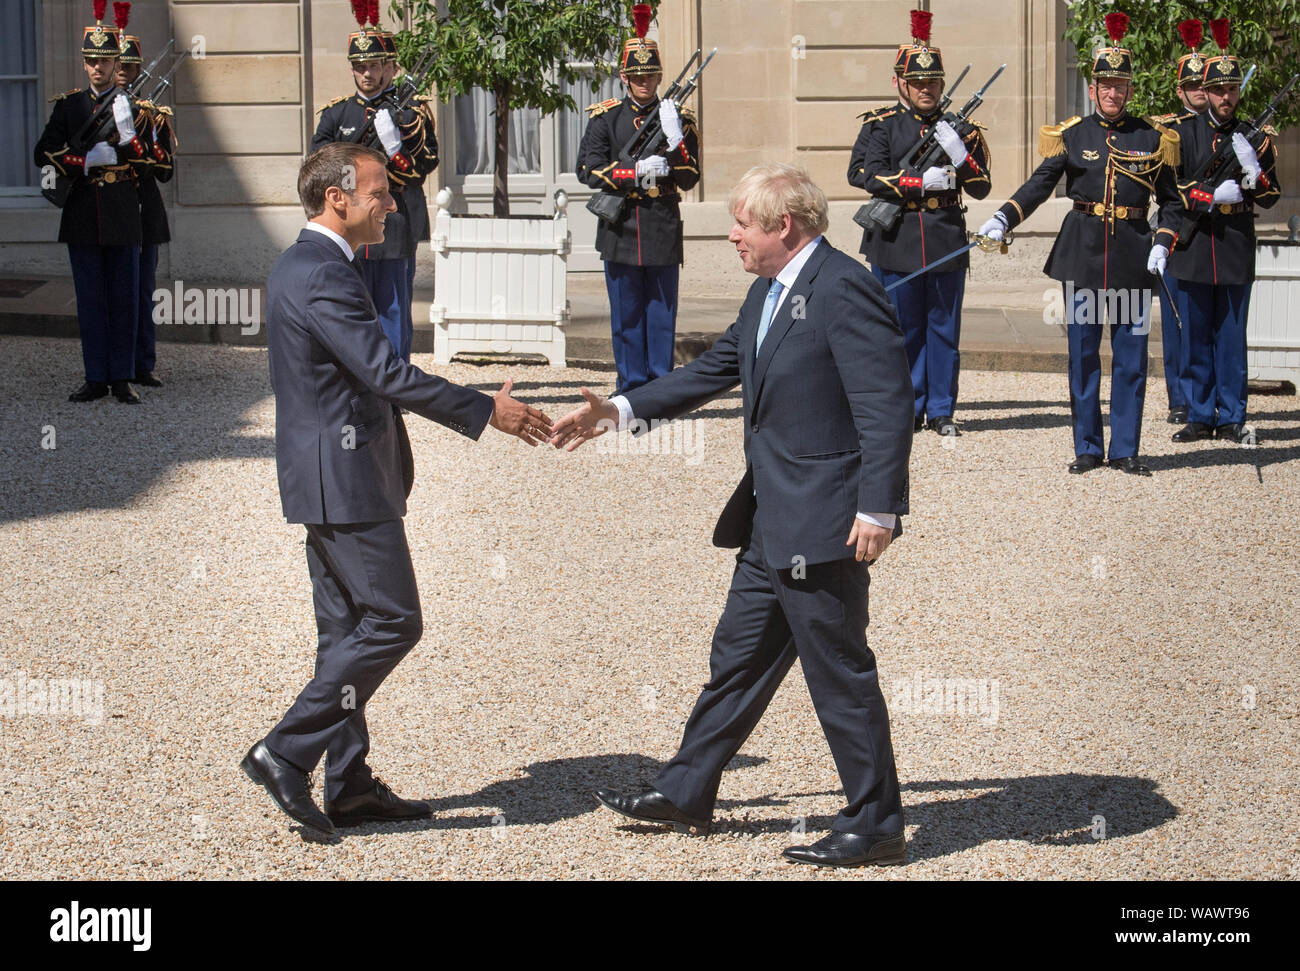 Prime Minister Boris Johnson with French President Emmanuel Macron at the Elysee Palace in Paris ahead of talks to try to break the Brexit deadlock. Stock Photo